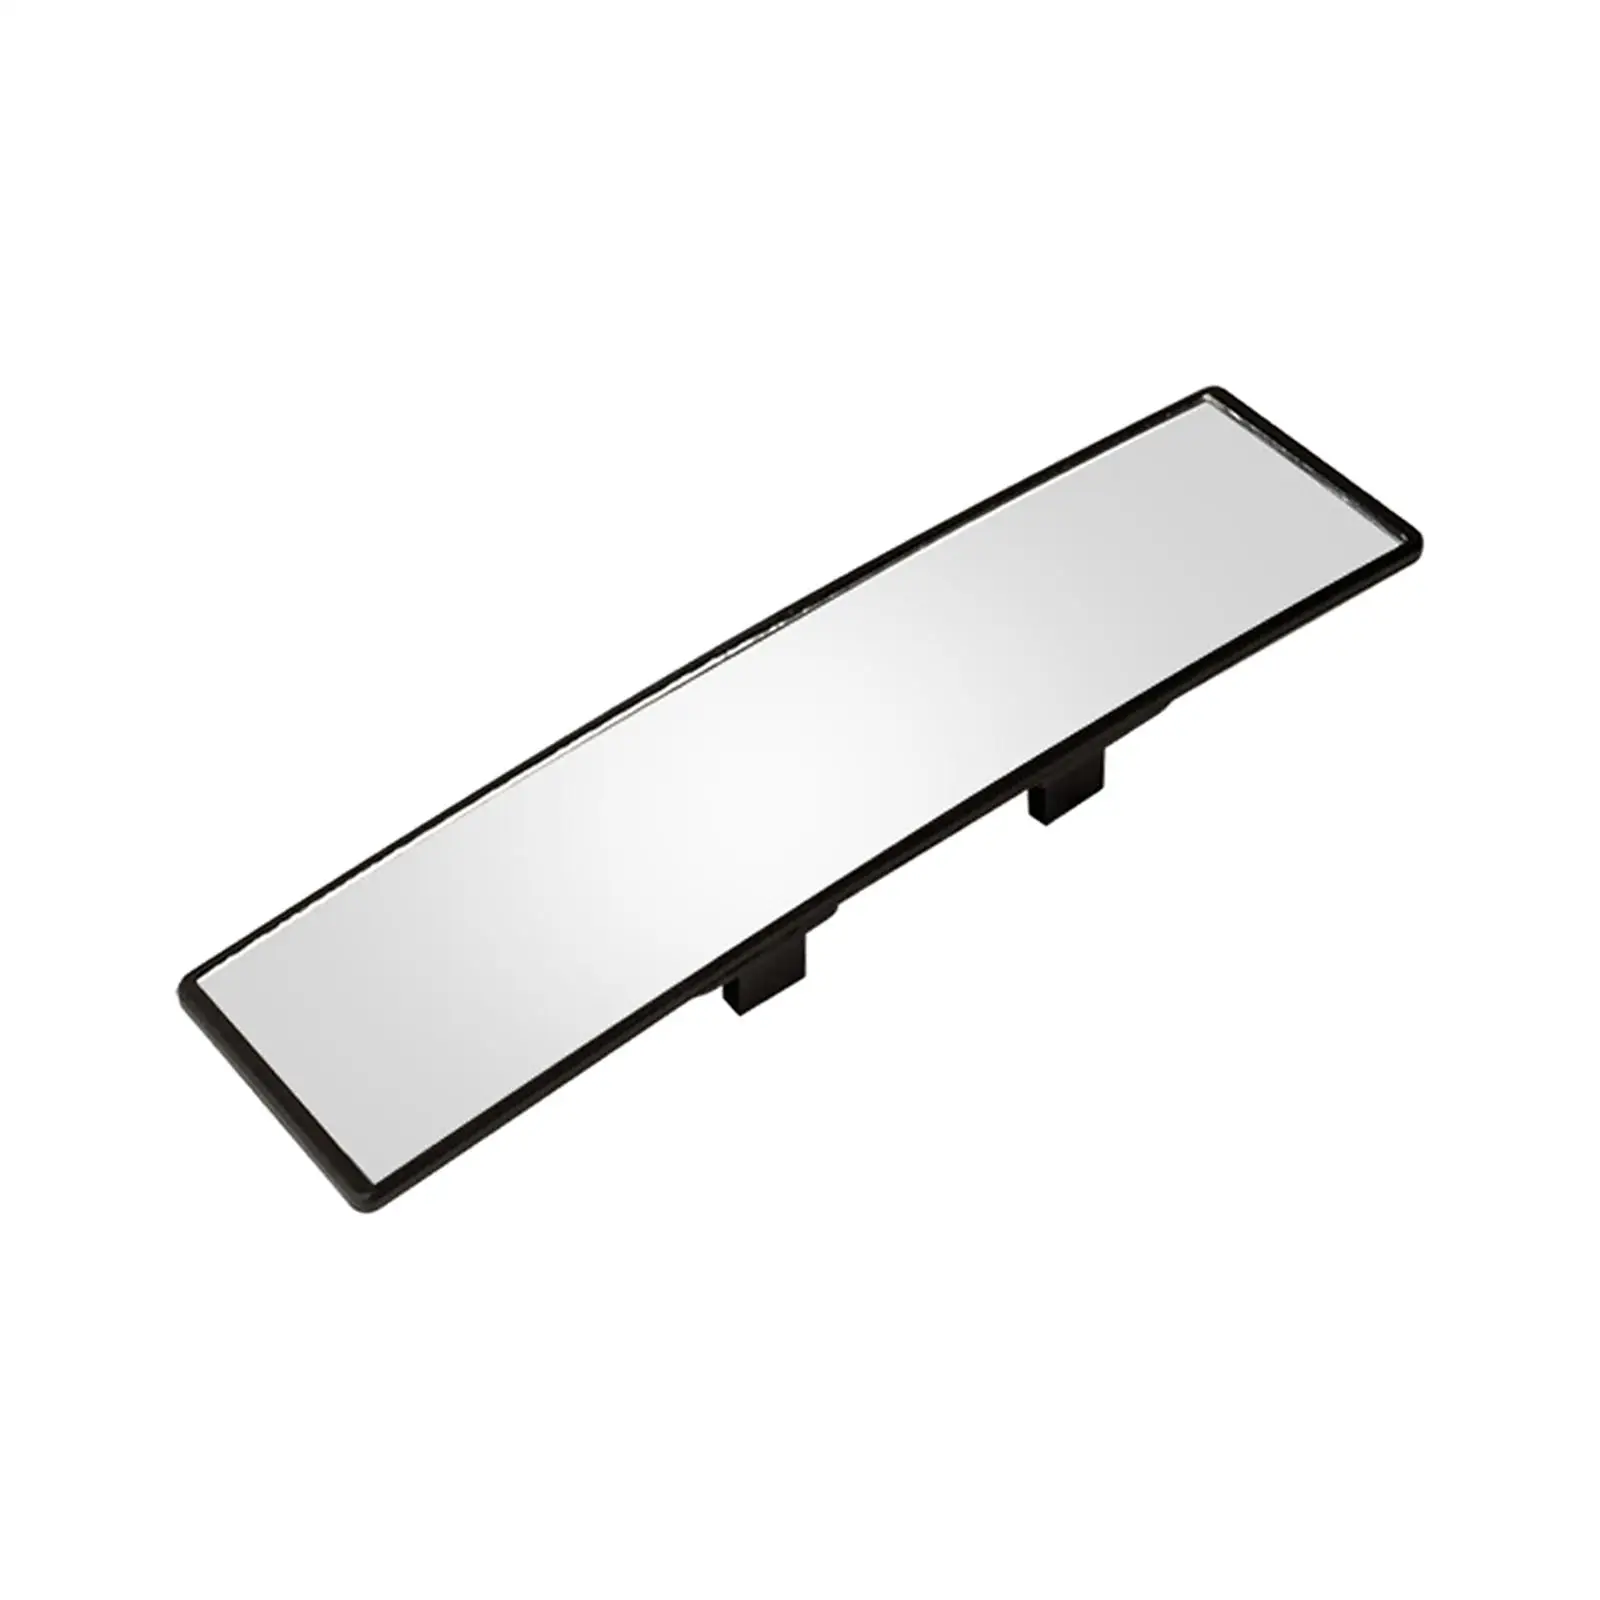 Rear View Mirror 11.2 inch Reduces Blind Spot Glass Convex Clip on Wide Angle Mirror for Automobile Trucks Car Vehicles Van